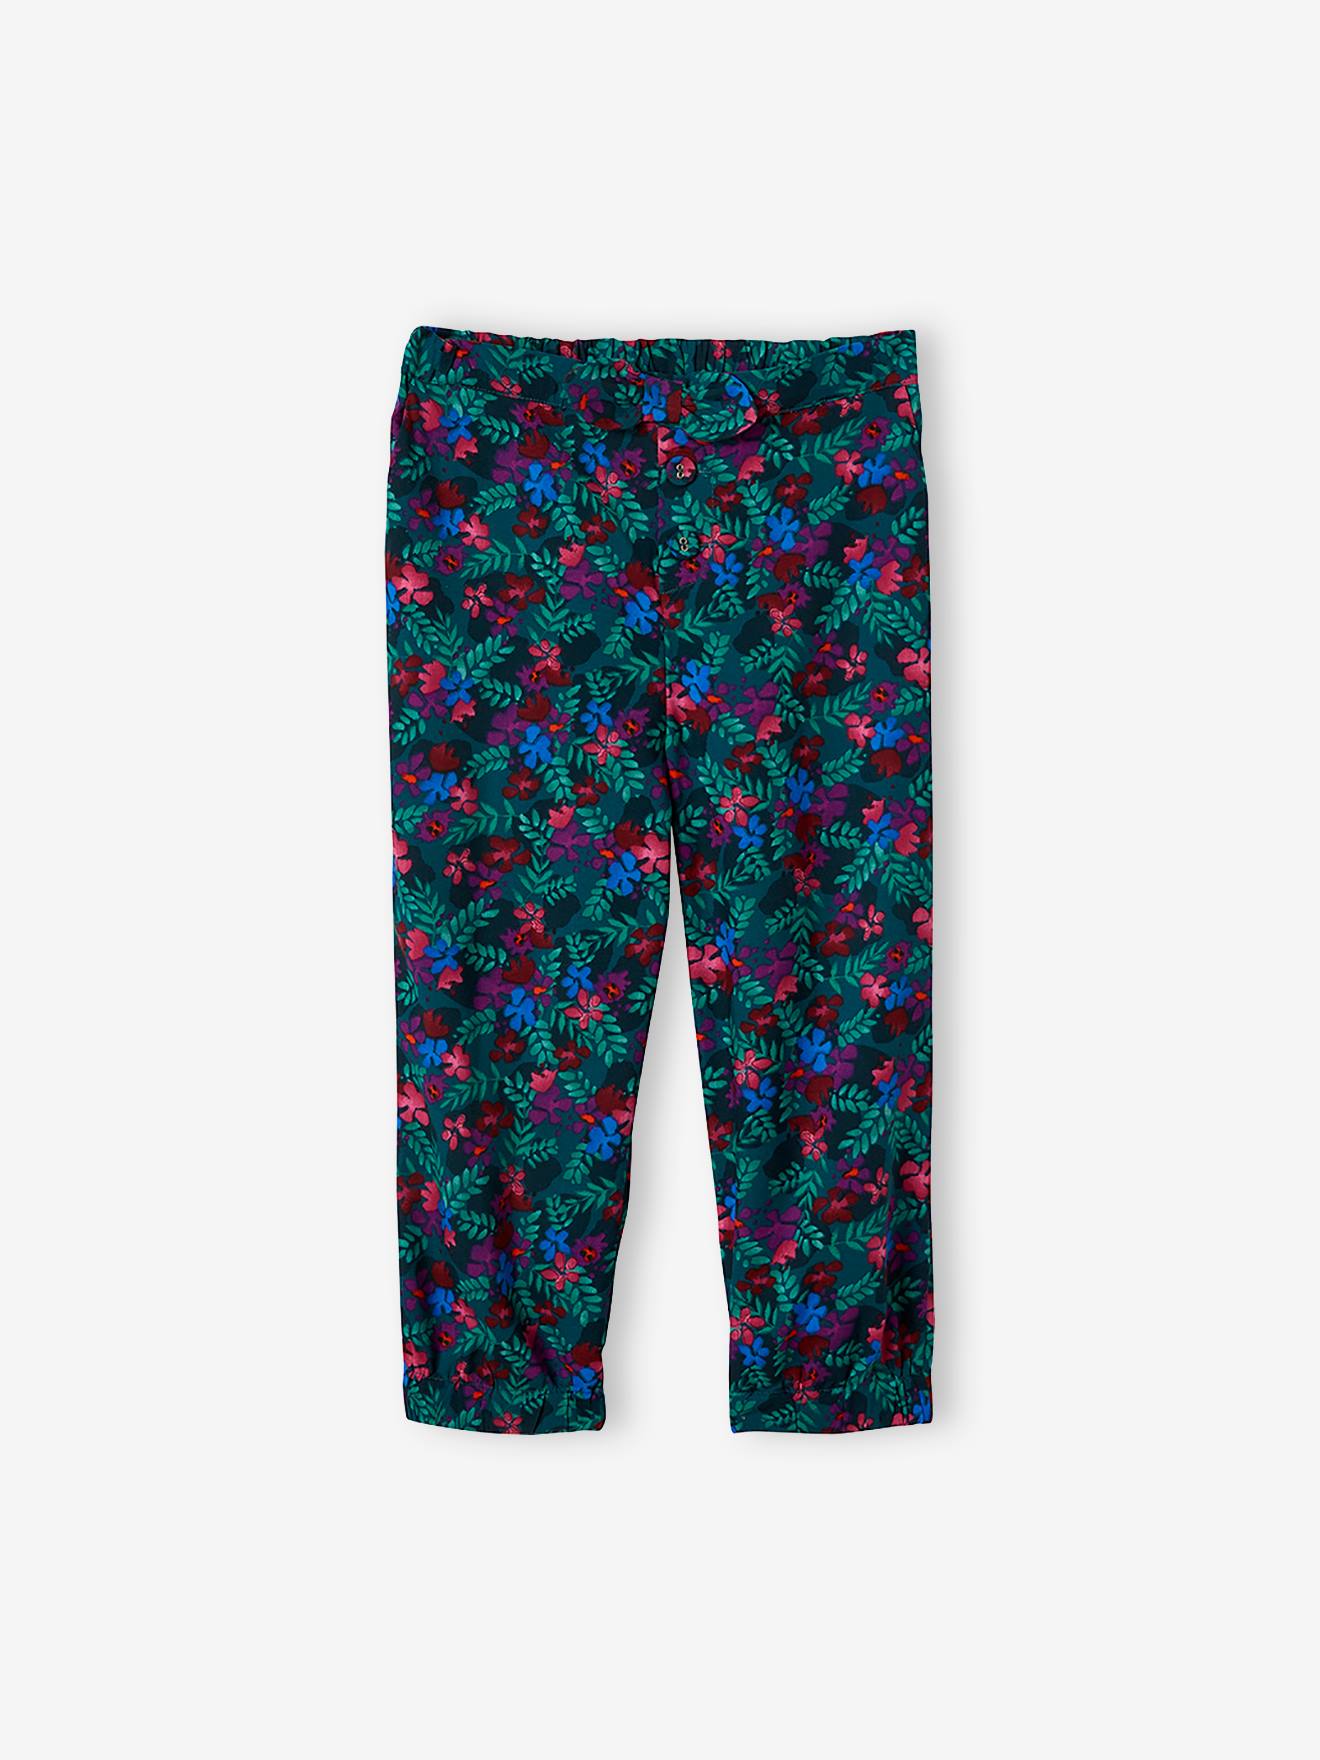 Fluid Cropped Trousers for Girls green dark all over printed